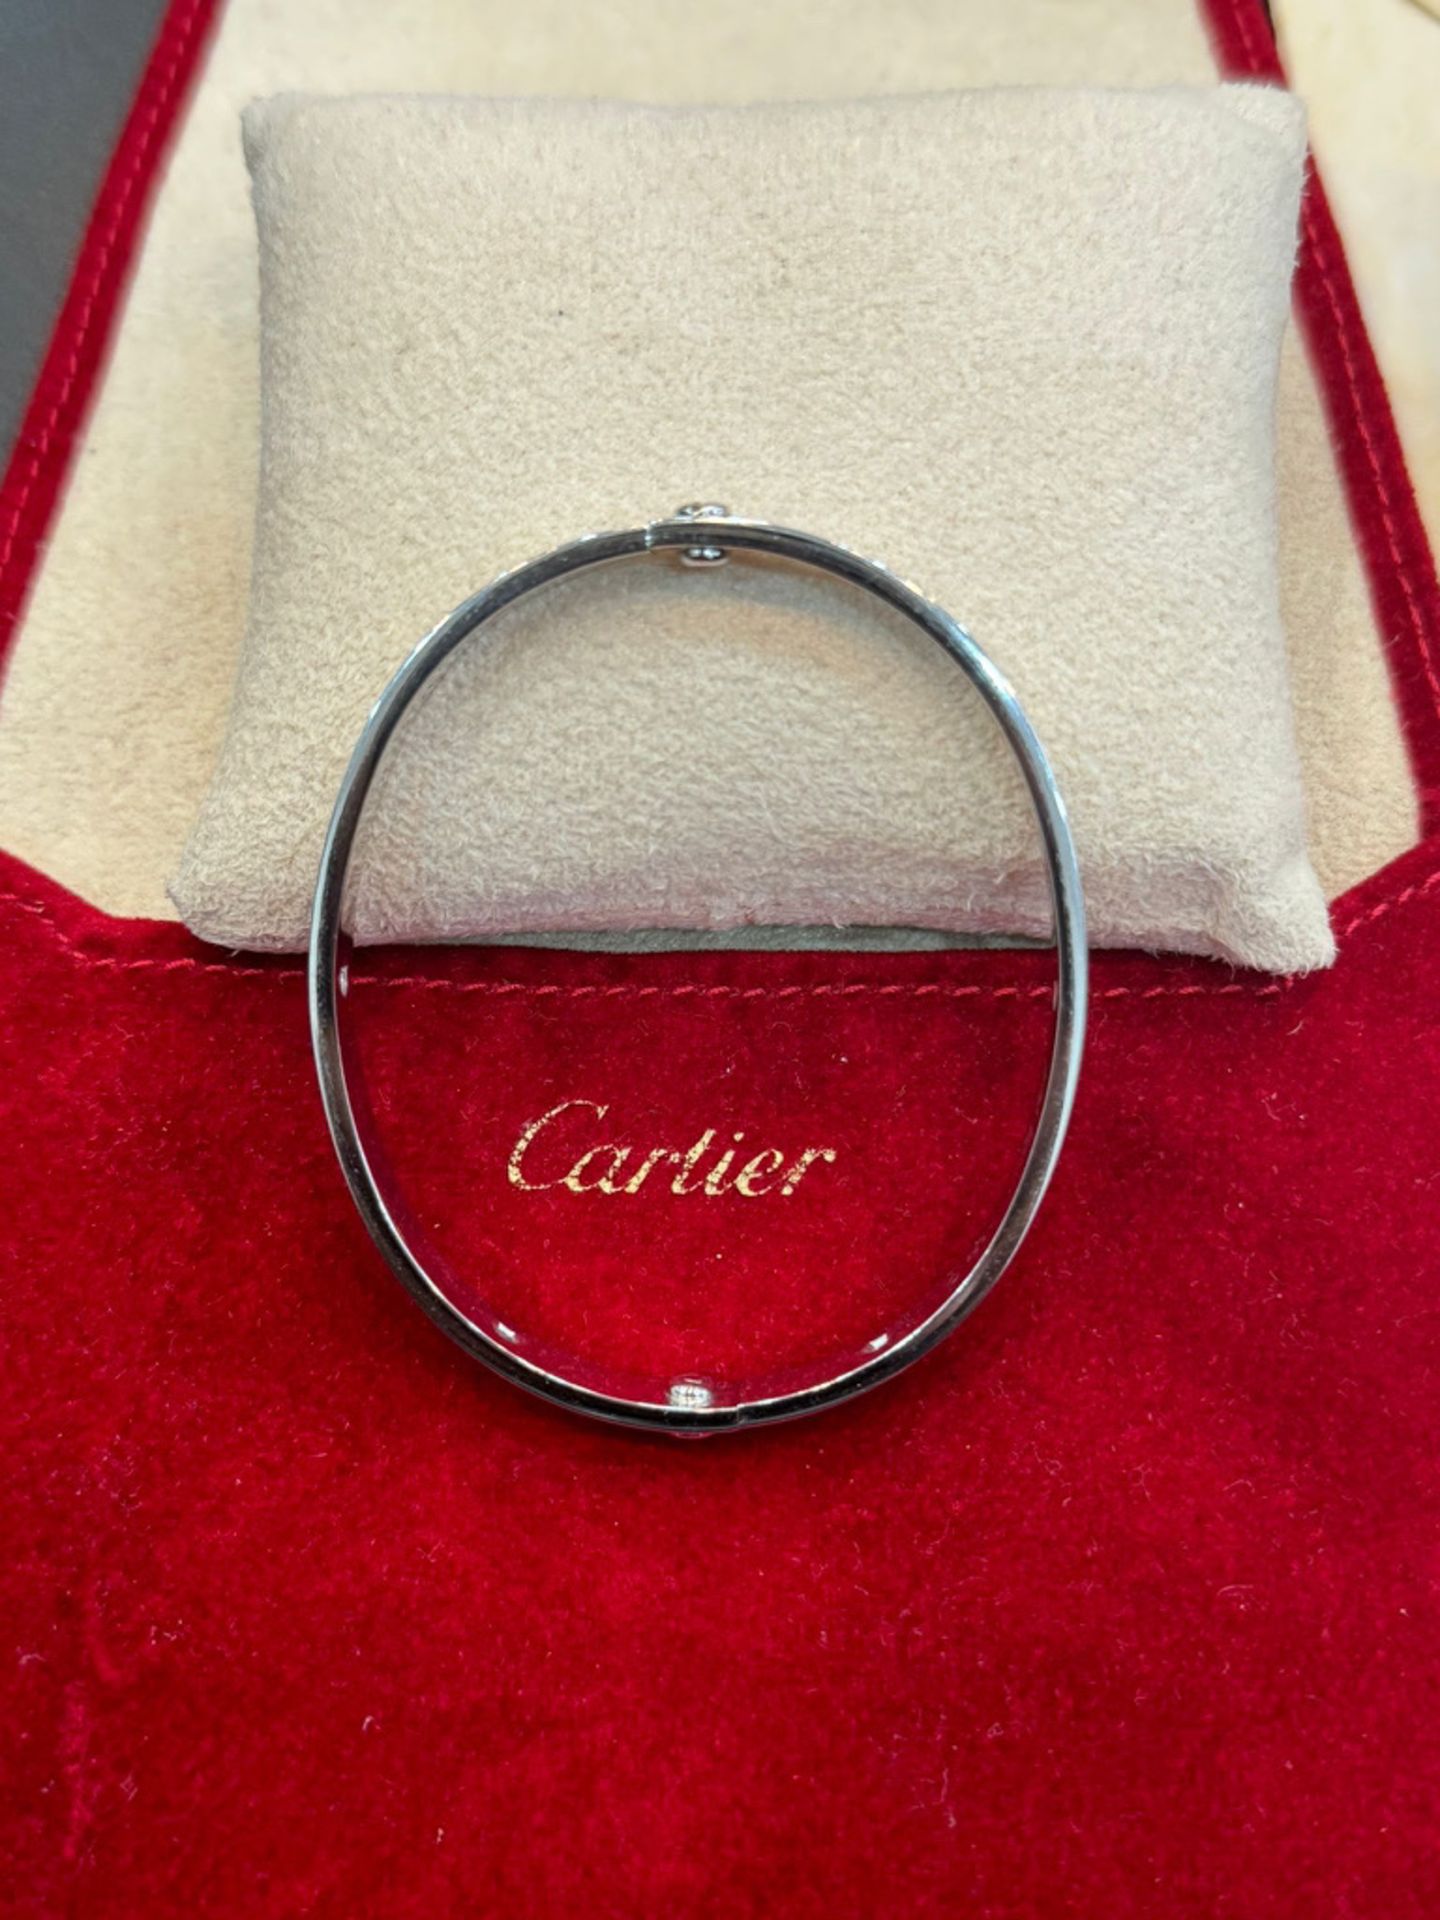 CARTIER DIAMOND SET 18ct WHITE GOLD BANGLE WITH PAPERWORK & POUCH - SIZE 18 - Image 9 of 13